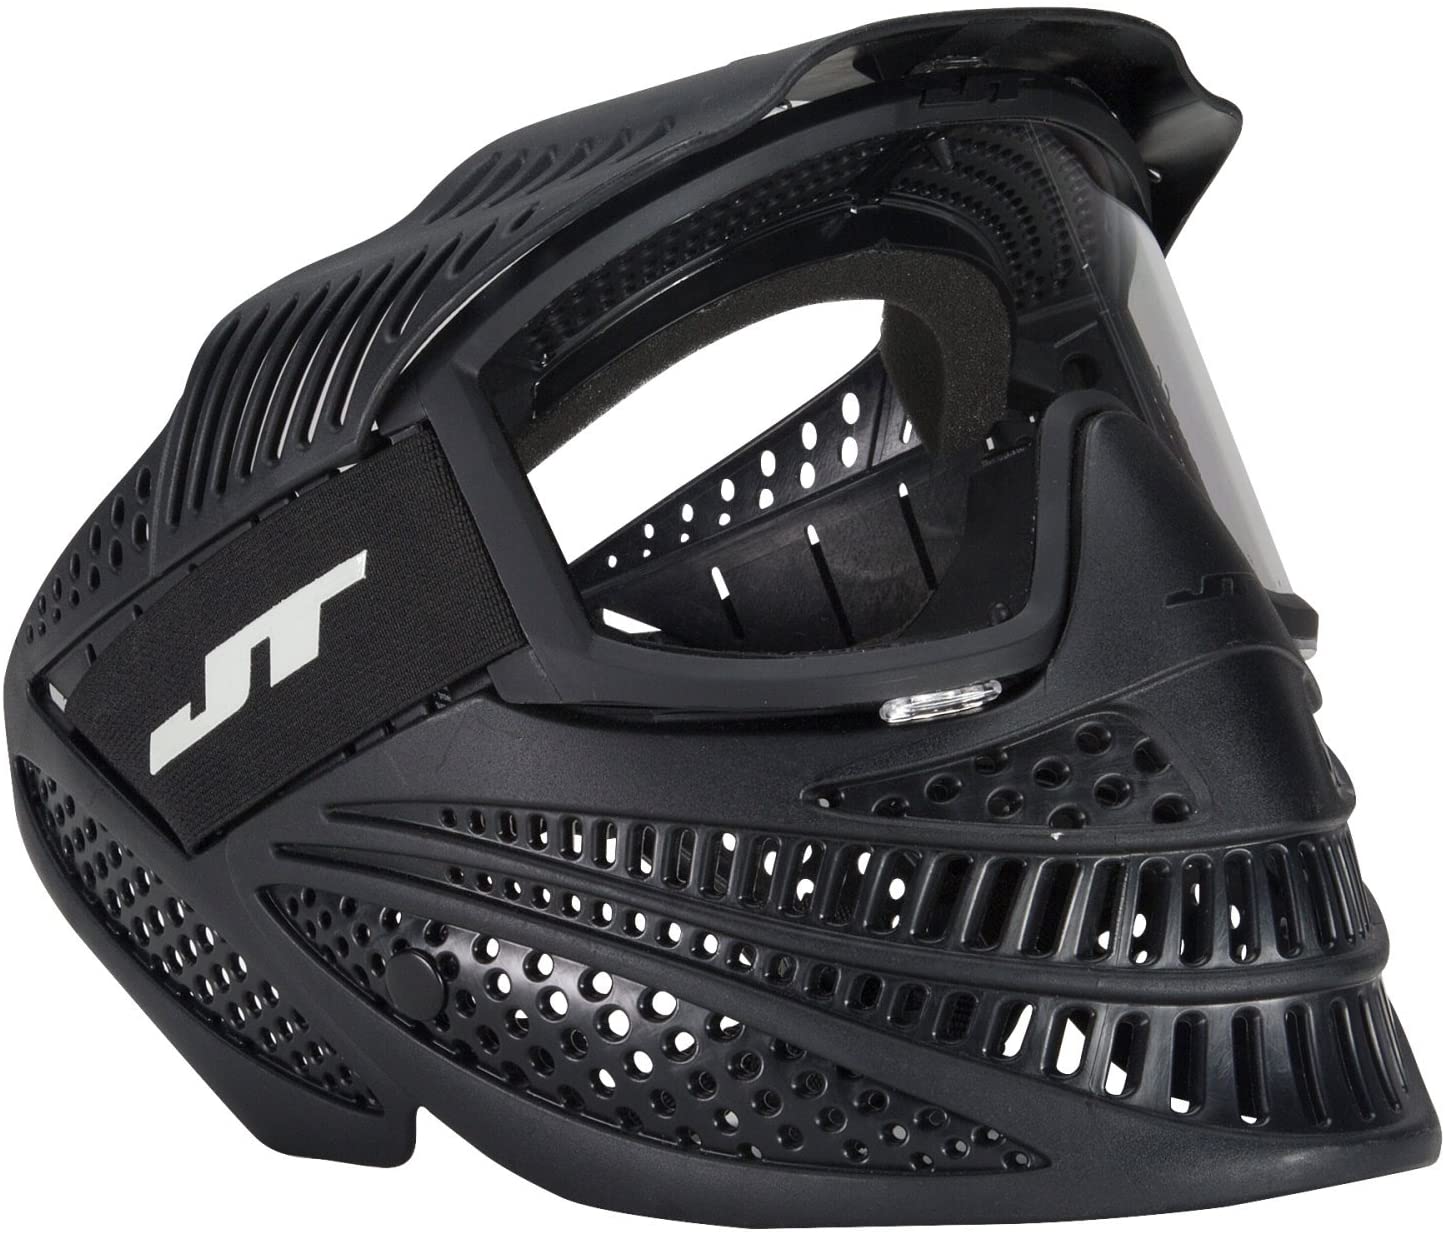 JT low range of paintball mask